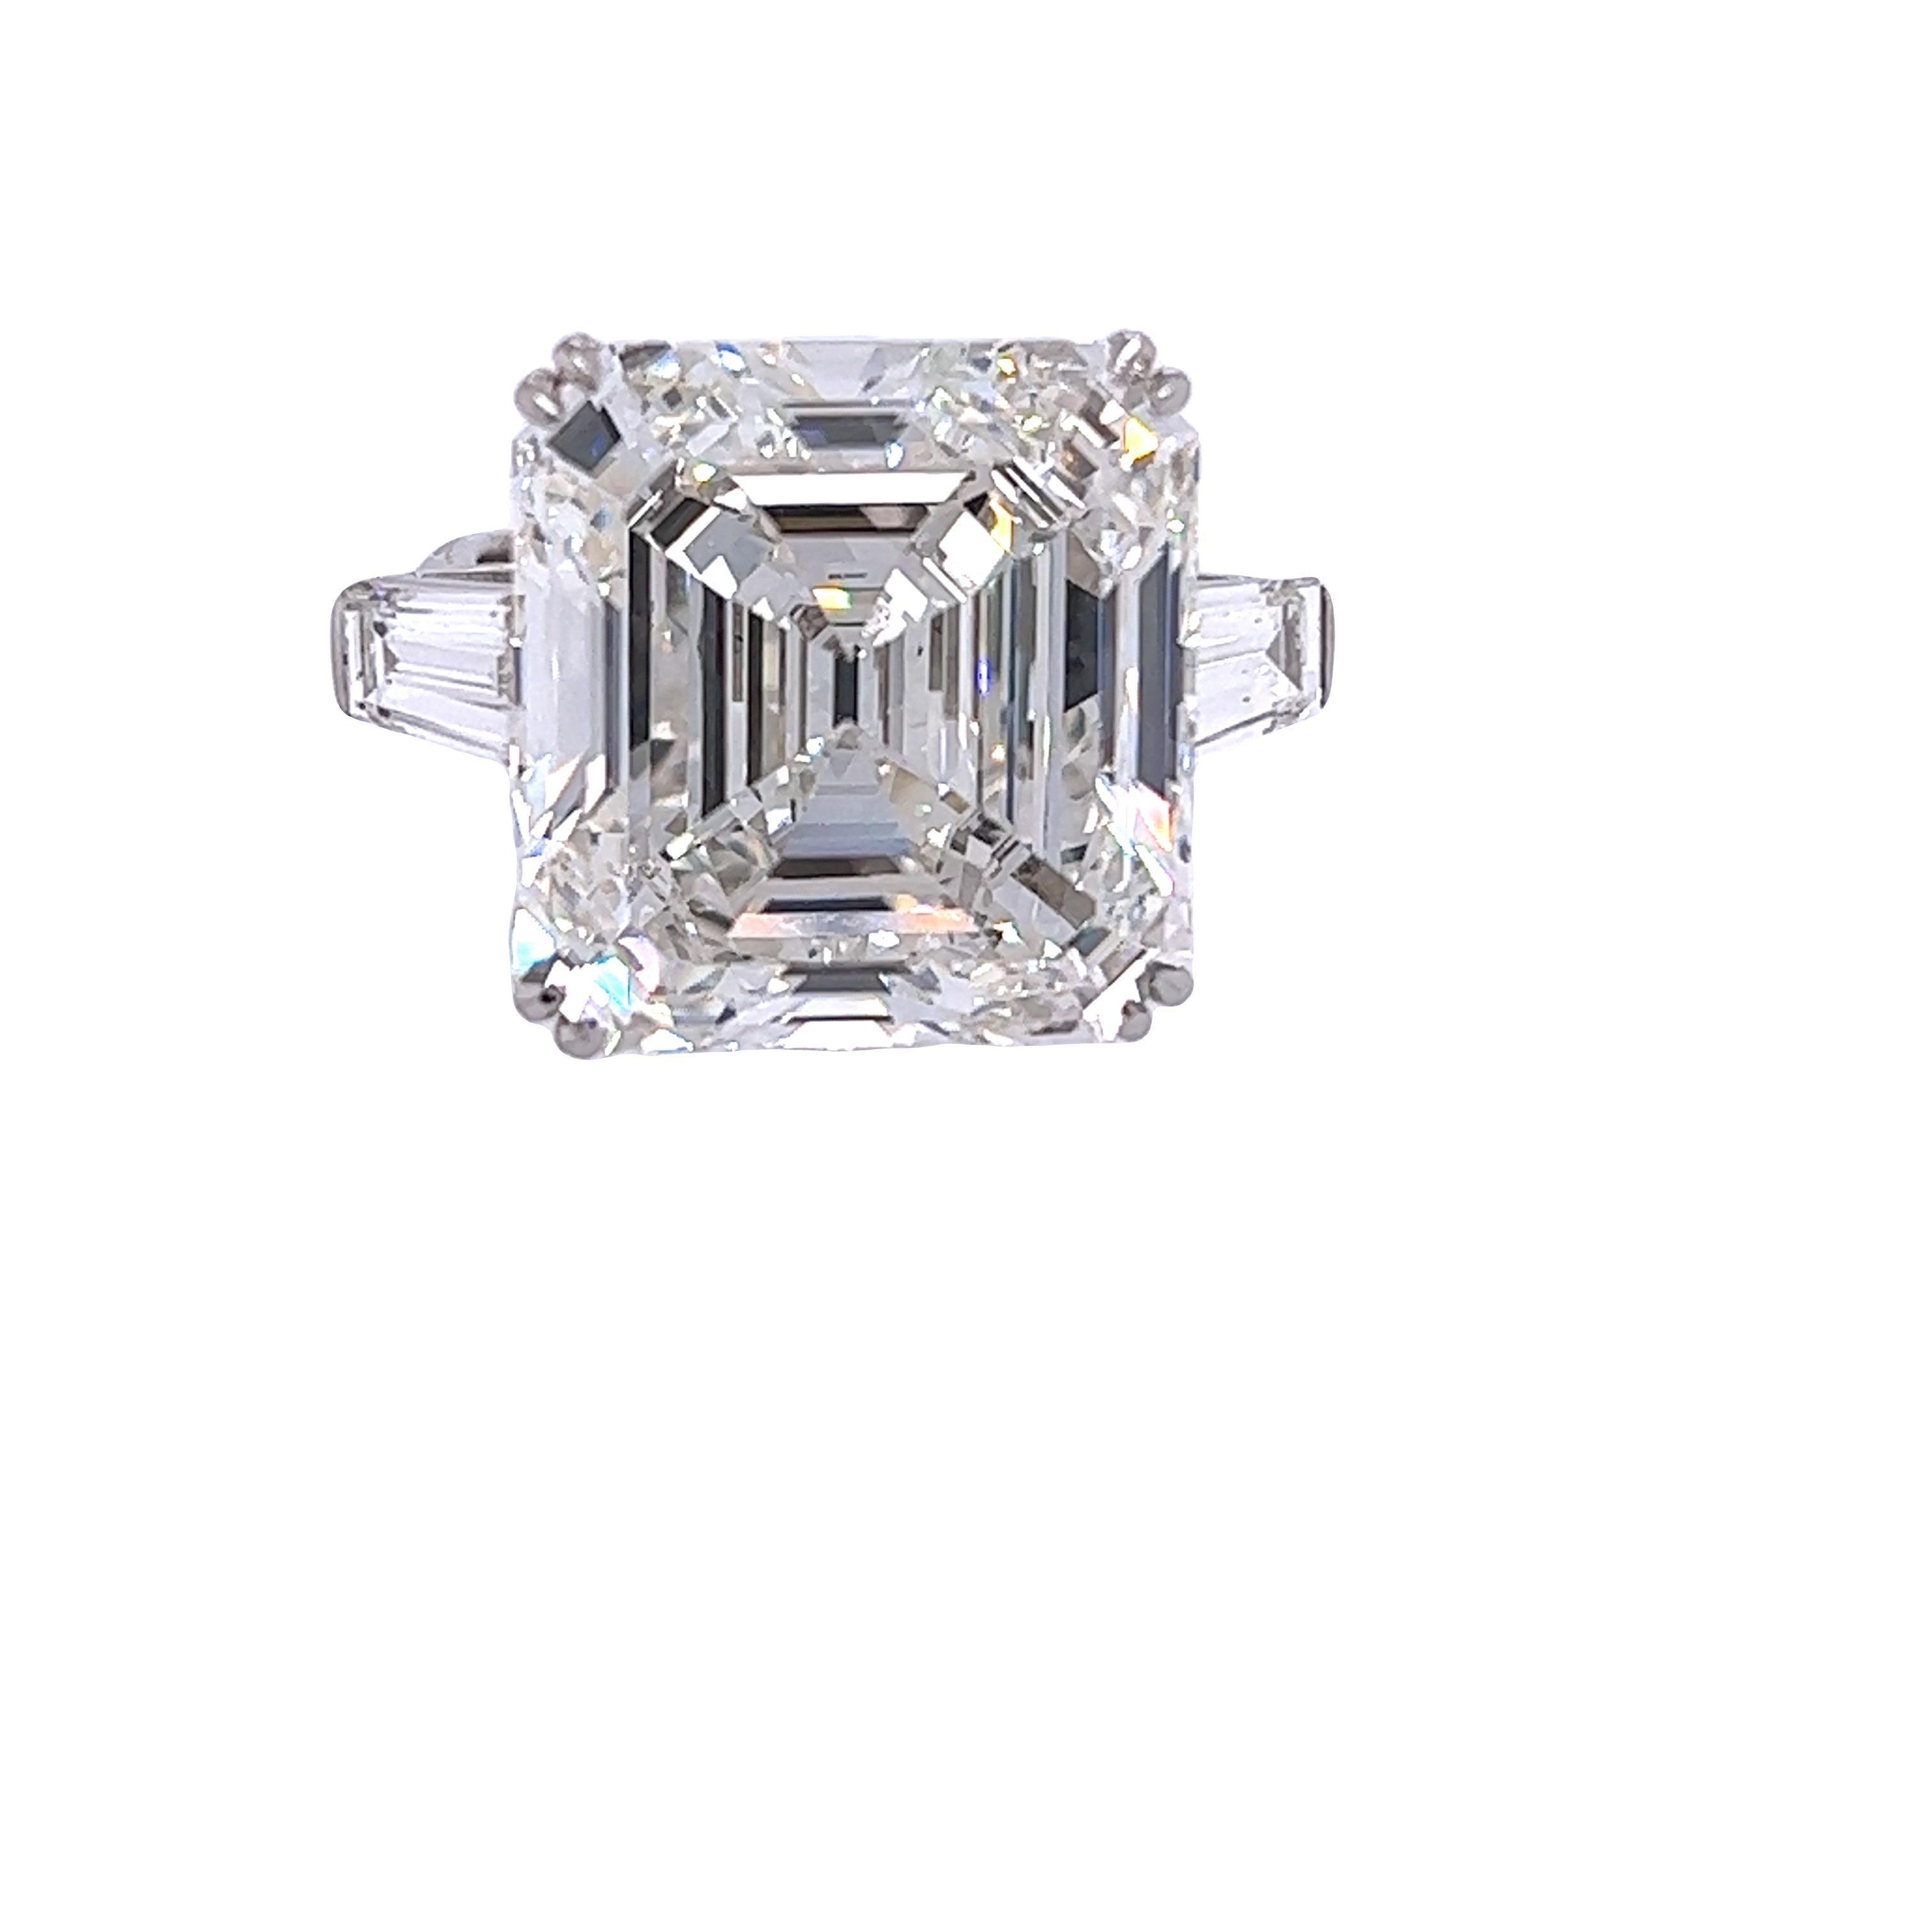 Rosenberg Diamonds & Co. 22.18 carat Asscher cut H color VS1 clarity is accompanied by a GIA certificate. This breathtaking Asscher is full of brilliance and it is set in a handmade platinum setting with perfectly matched pair of tapered baguettes